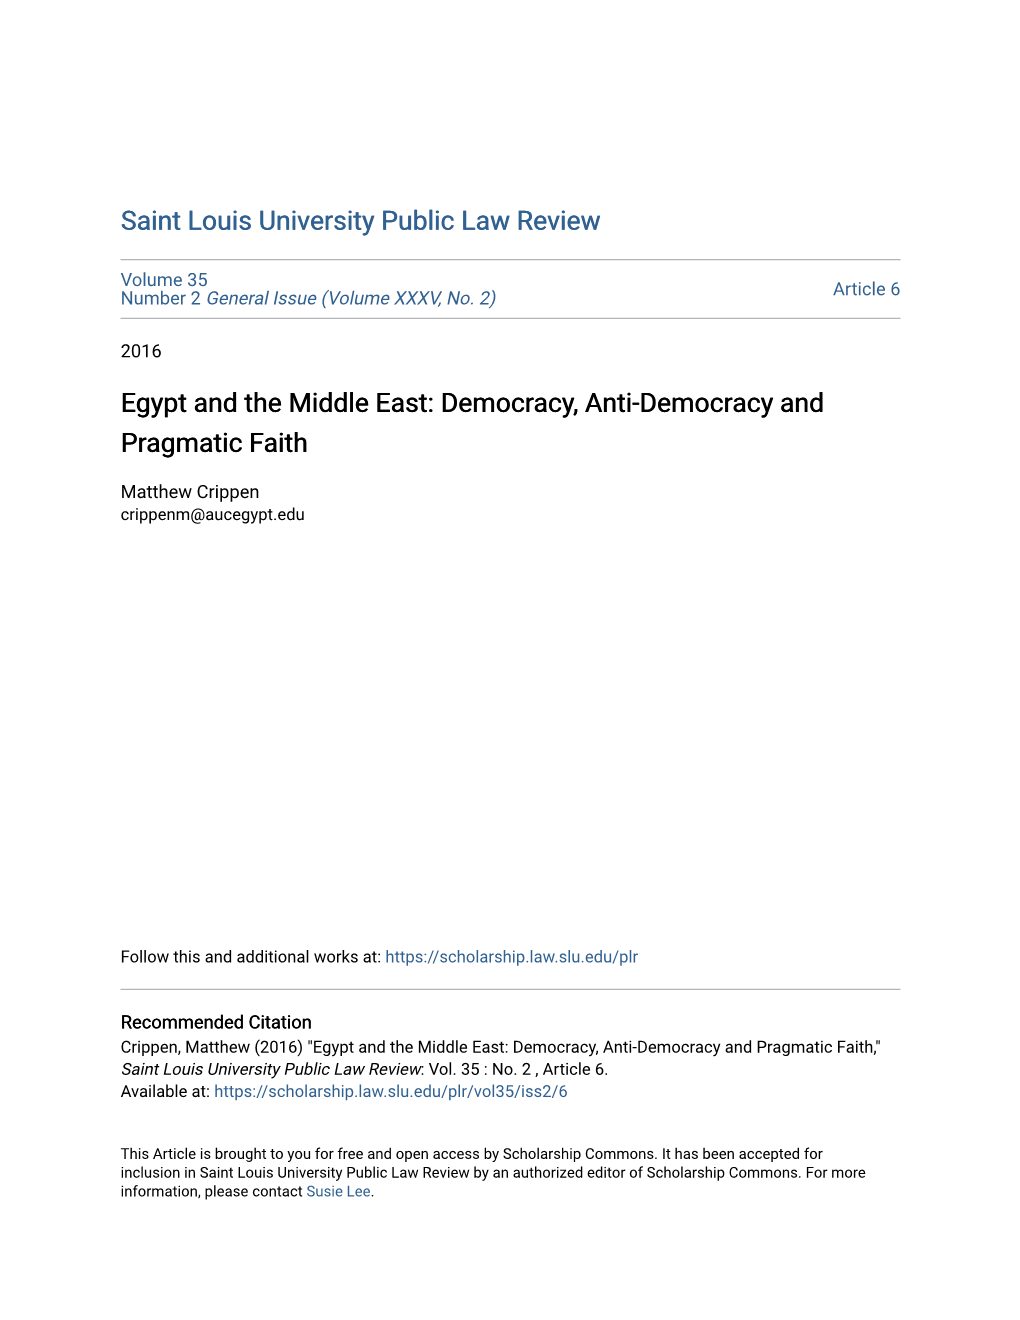 Egypt and the Middle East: Democracy, Anti-Democracy and Pragmatic Faith